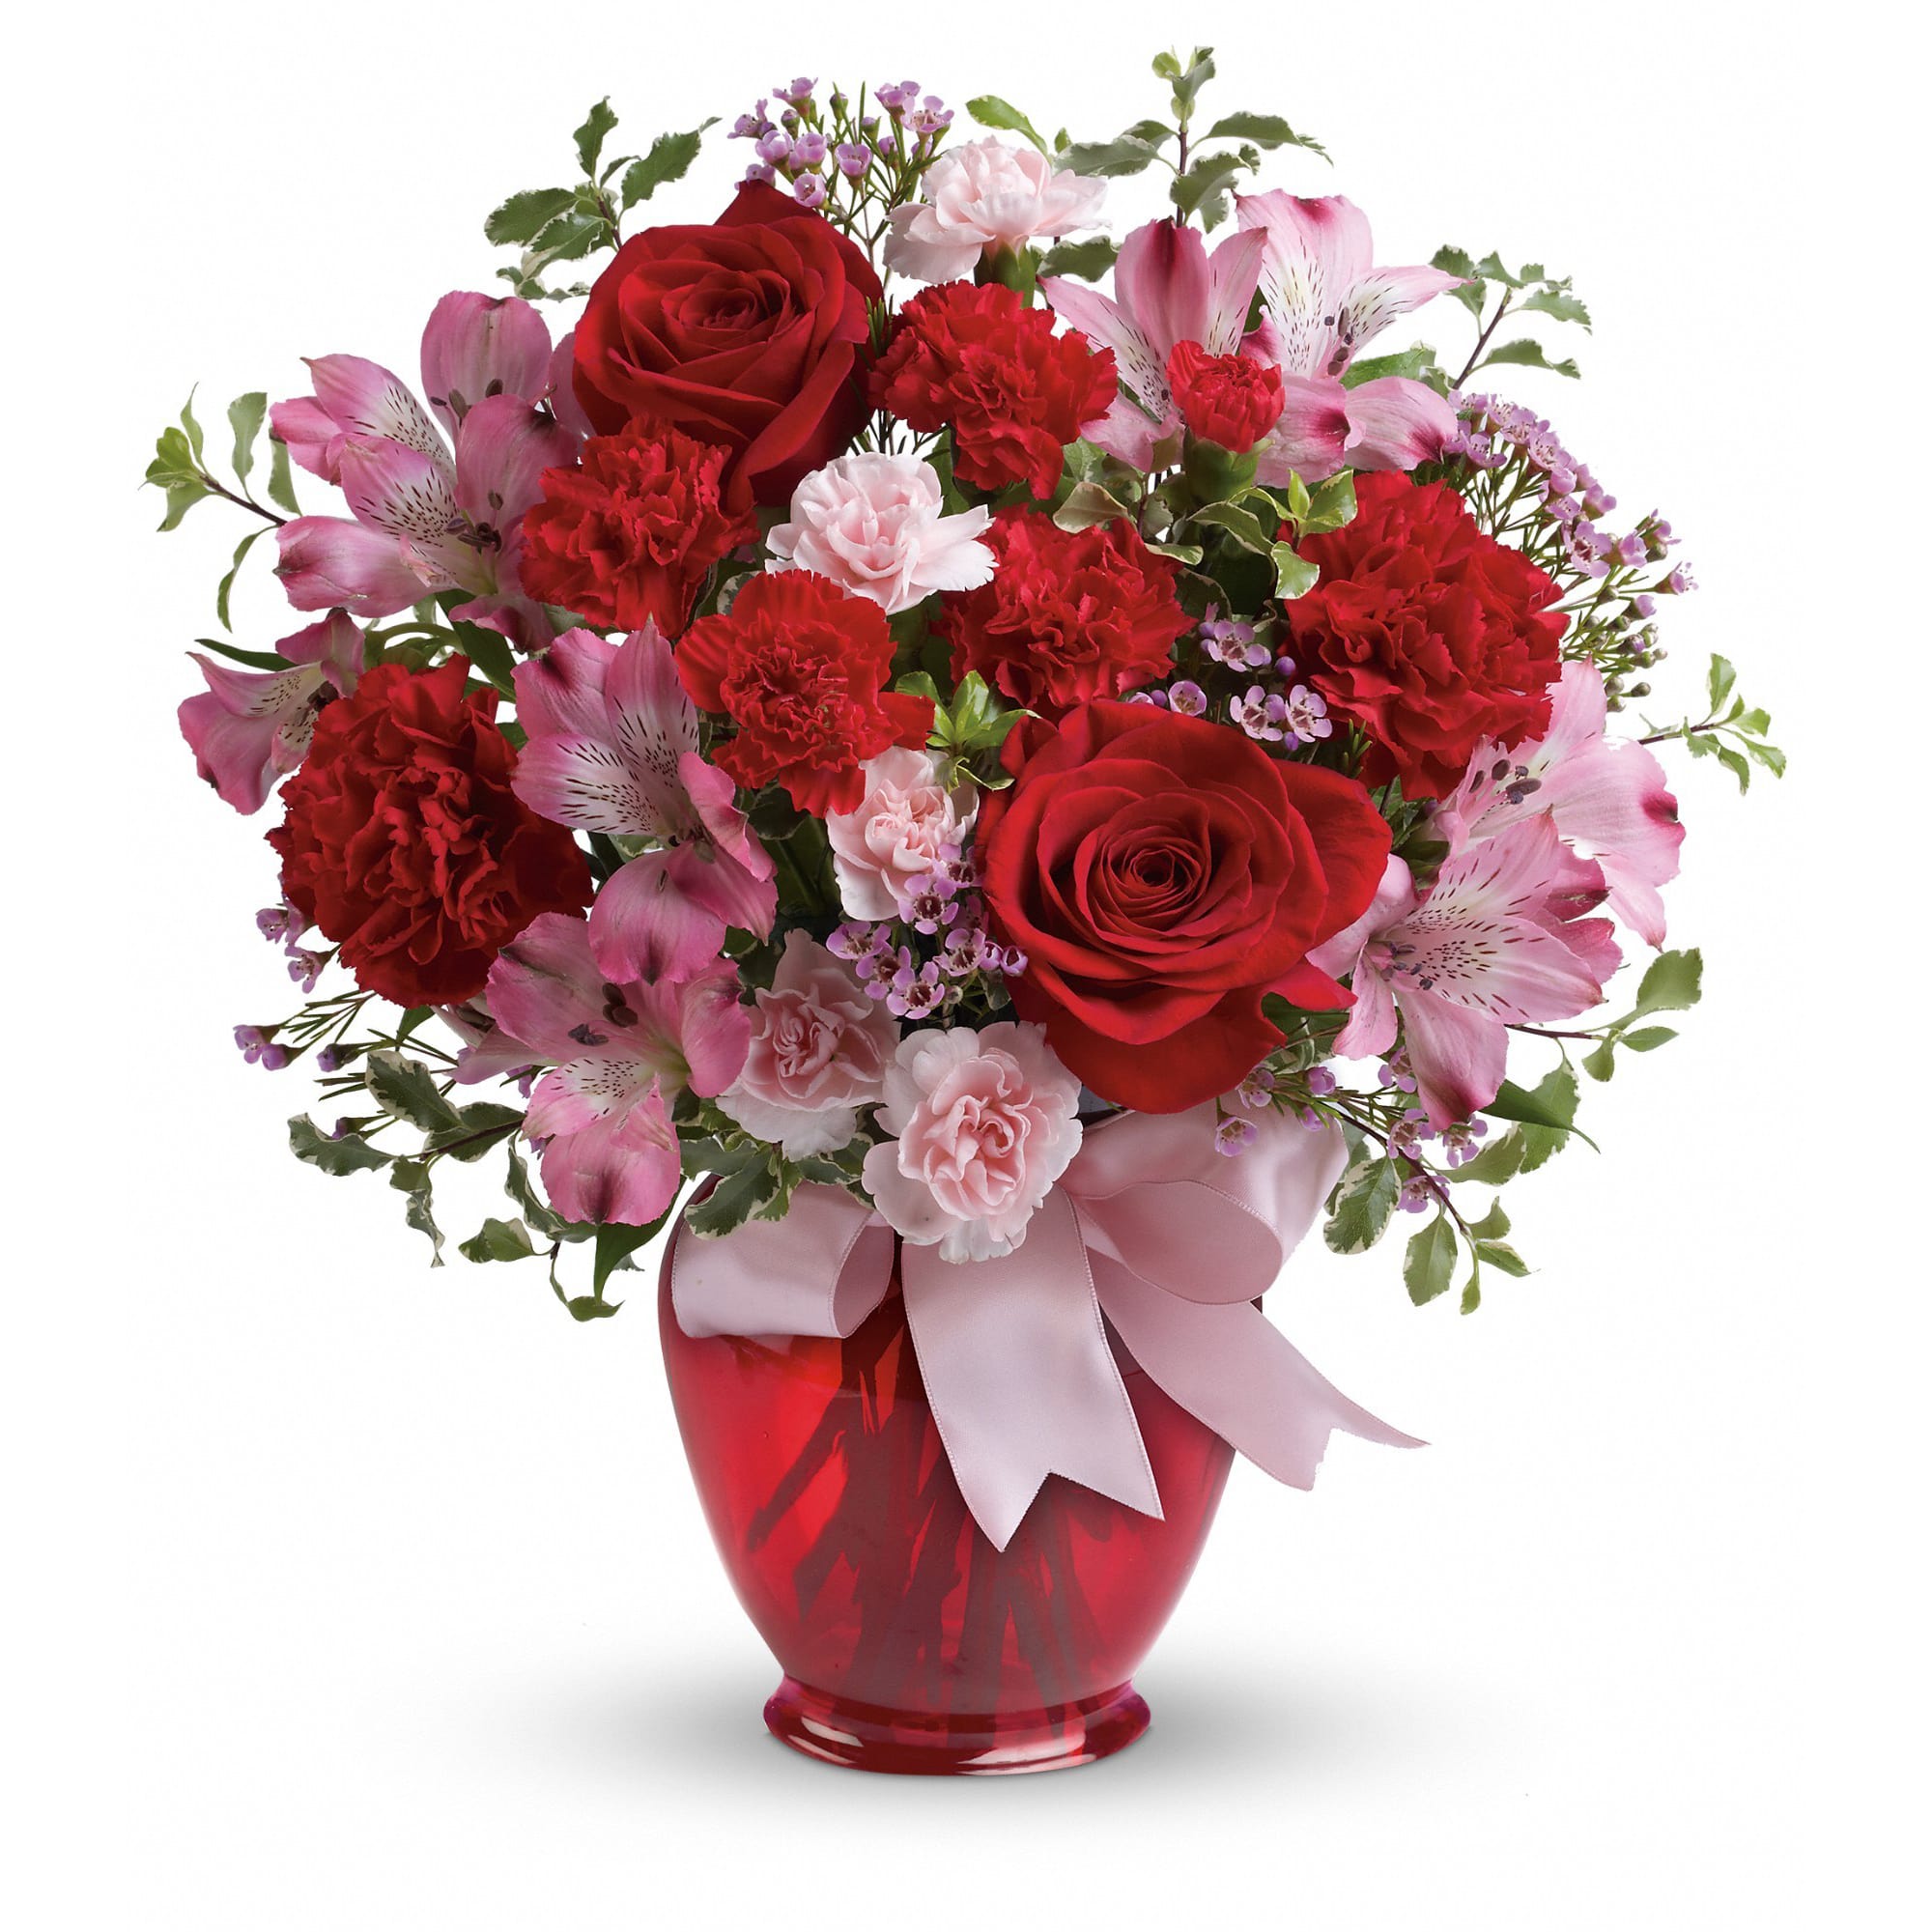 Teleflora's Blissfully Yours Bouquet - Spread the love! It's true bliss receiving a gift as lovely as this: gorgeous red roses and delicate pink alstroemeria, lovingly arranged in a keepsake Ginger jar. All tied up with a pretty pink bow, it's a surprise she'll adore now and forever! 